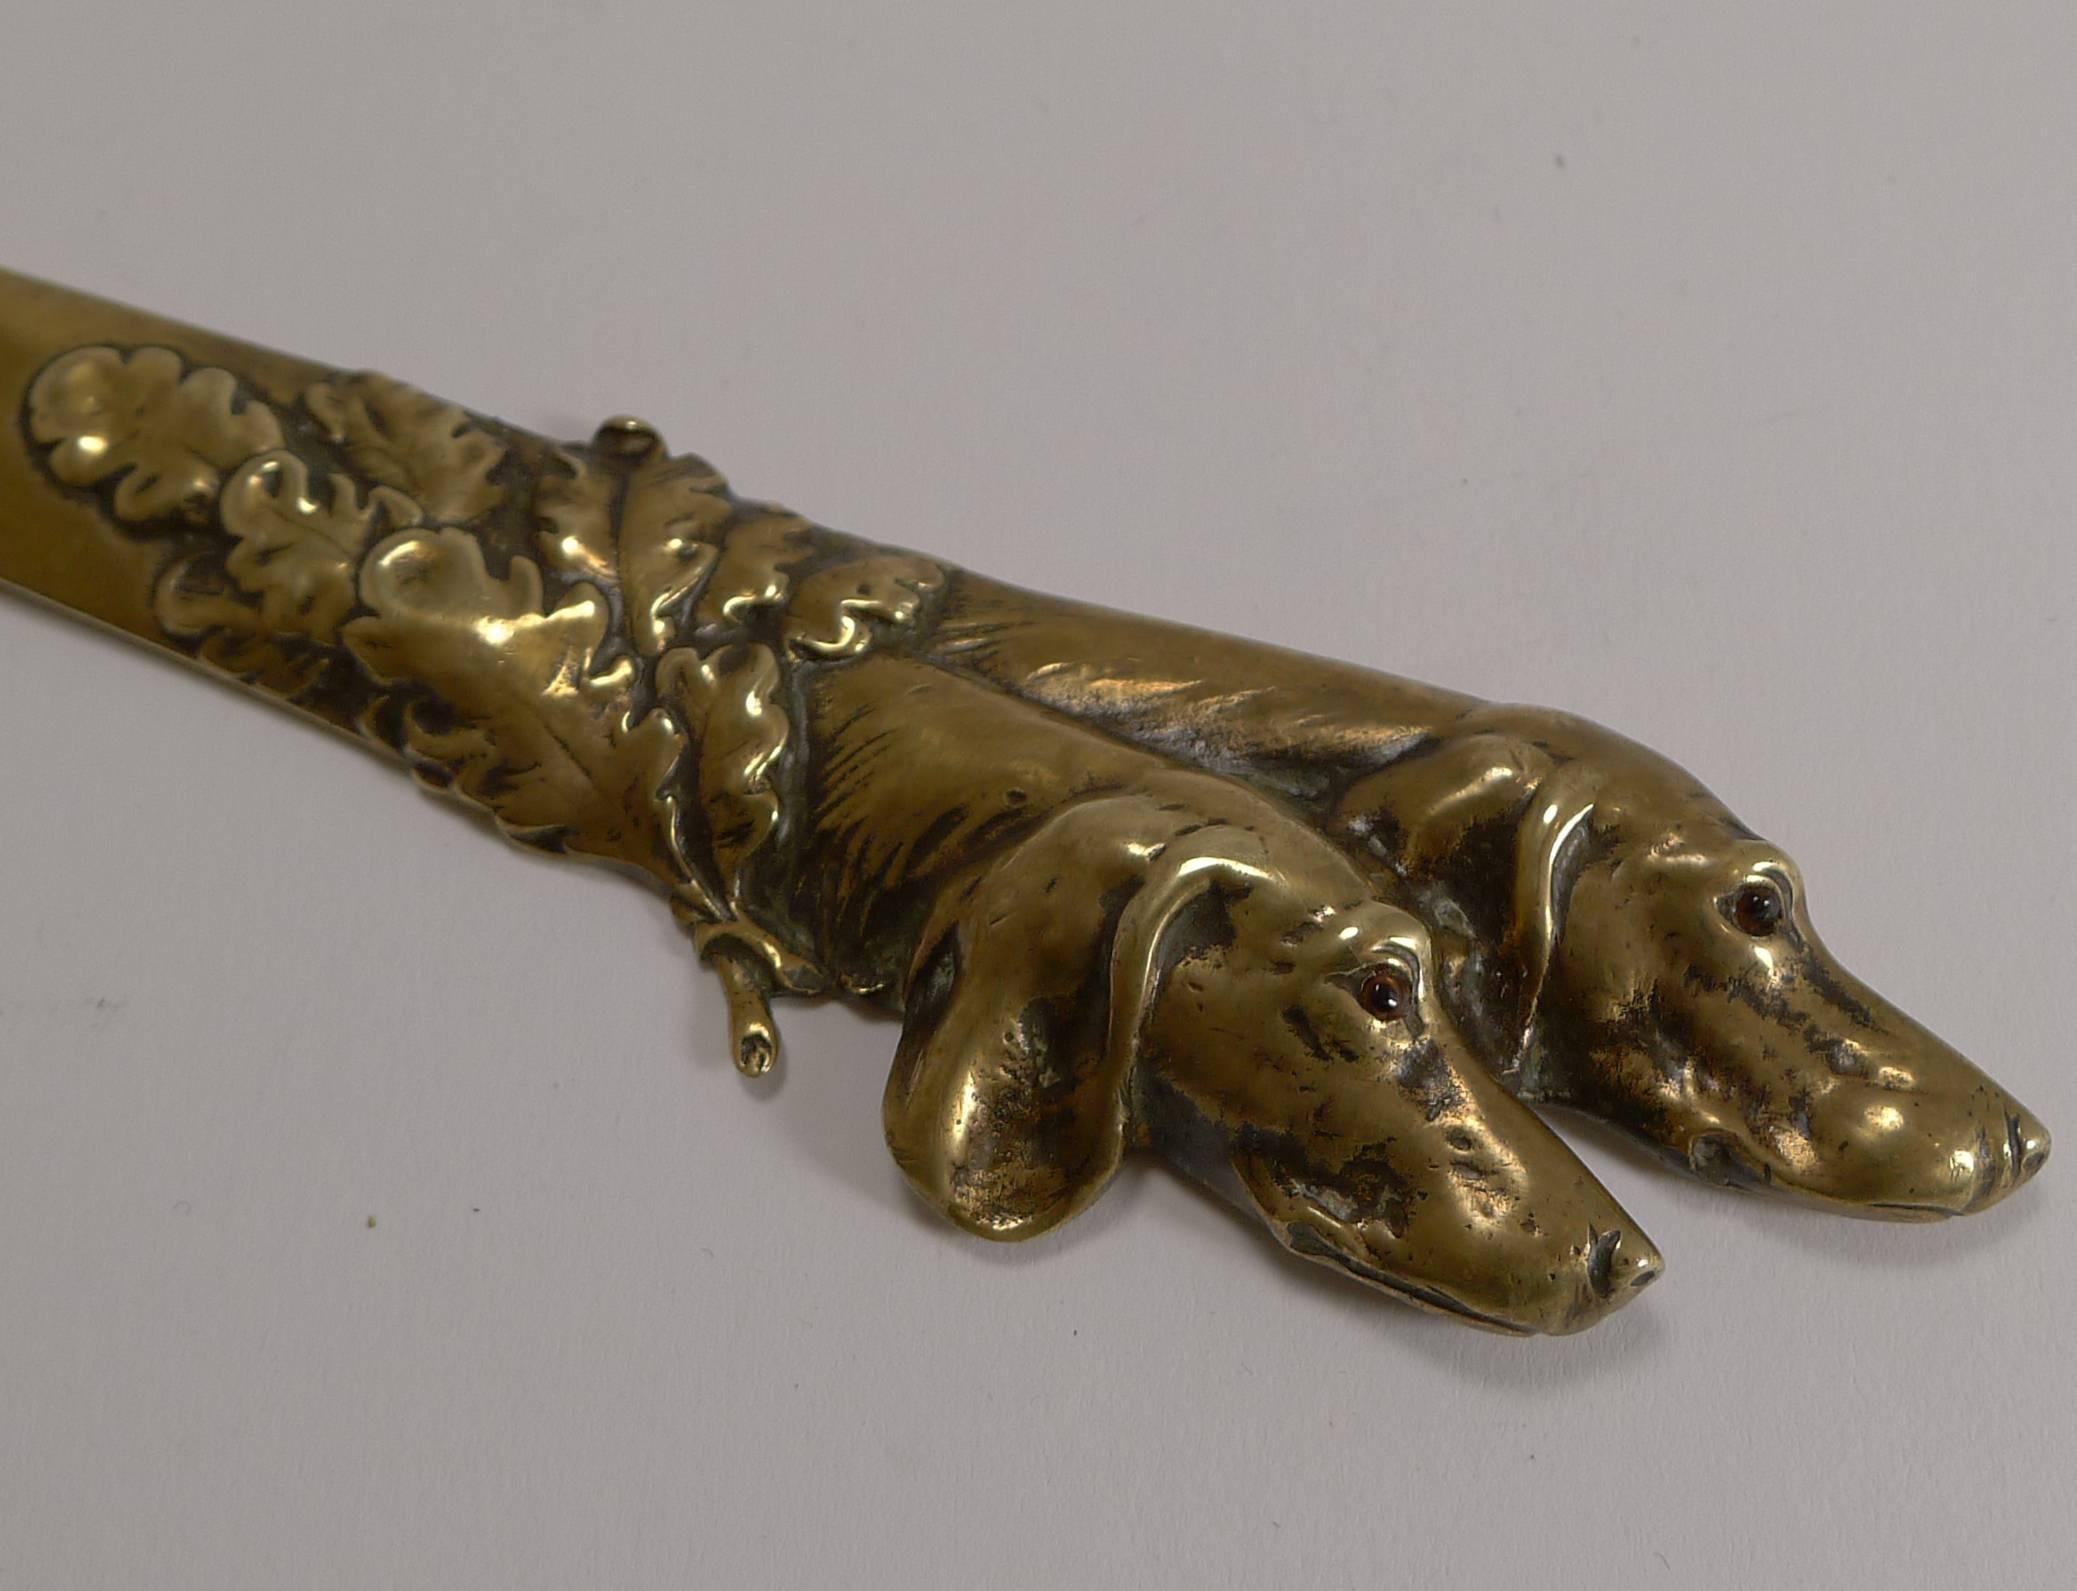 A fabulous desk-top accessory, this solid cast brass letter opener dates to circa 1900, with the makers mark stamped on the underside, I have not been able to identify the manufacturer.

Beautifully cast, the handle is formed by two handsome dog